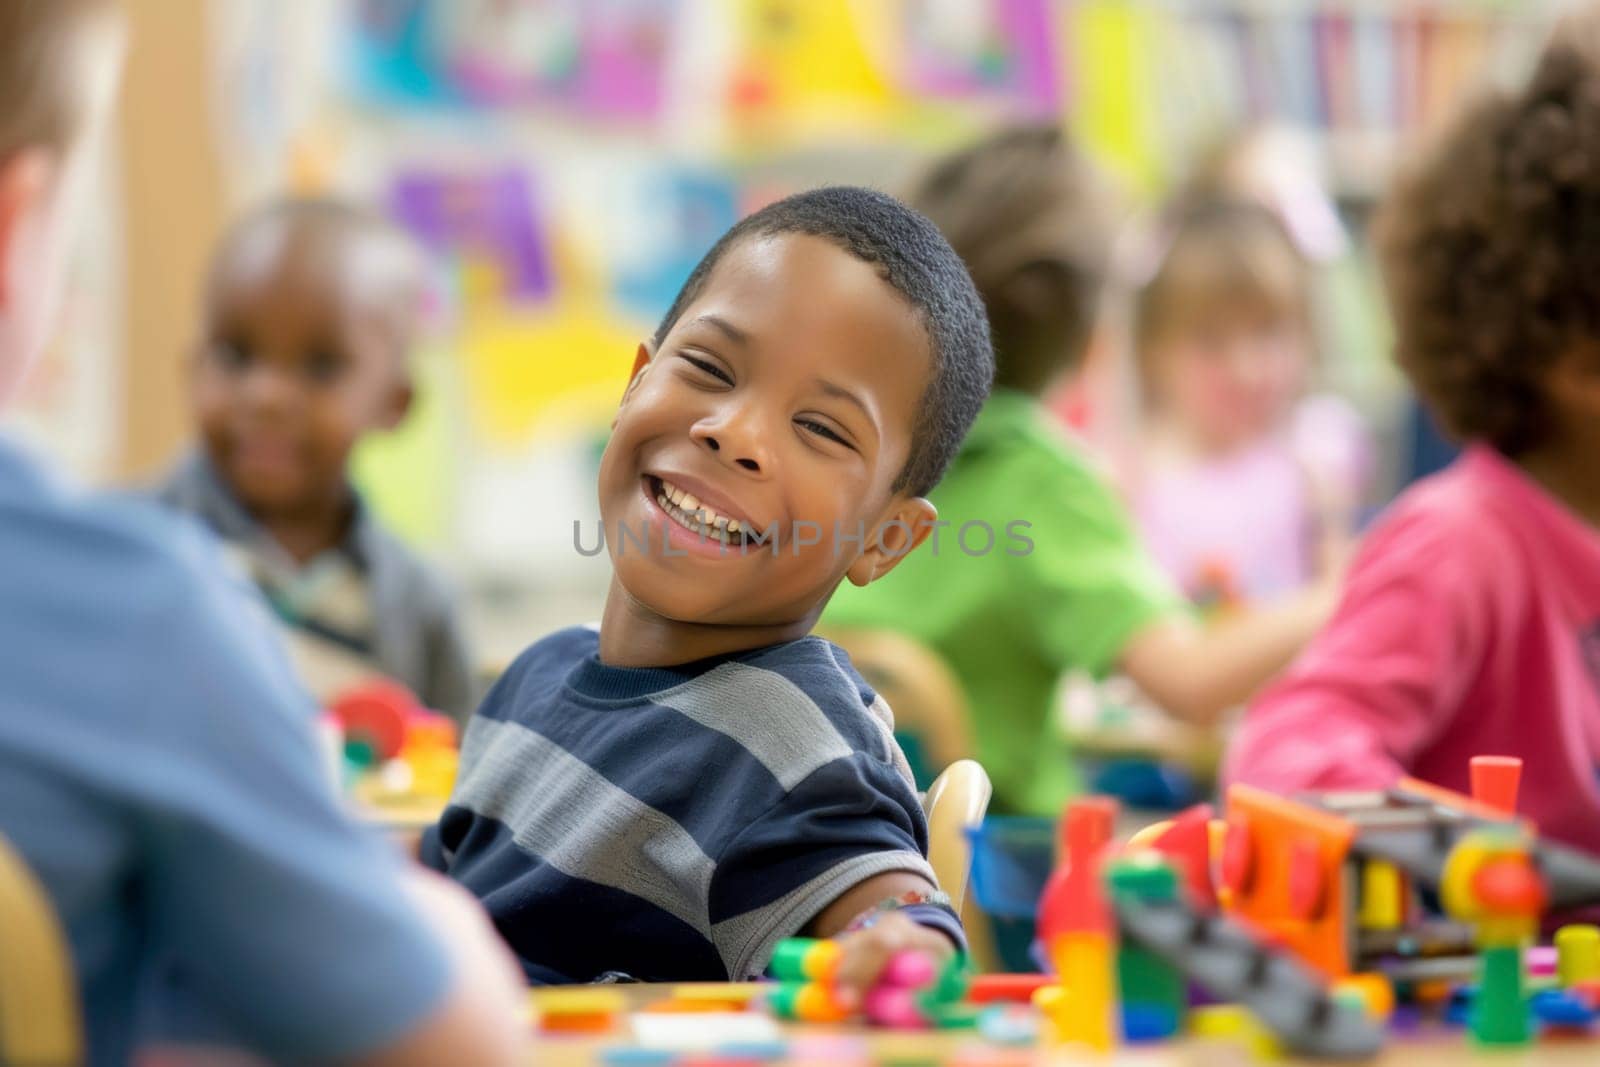 A young boy smiles brightly in a colorful classroom, embodying the success of inclusive education among his diverse peers. The classroom environment is vibrant and engaging, promoting a sense of community